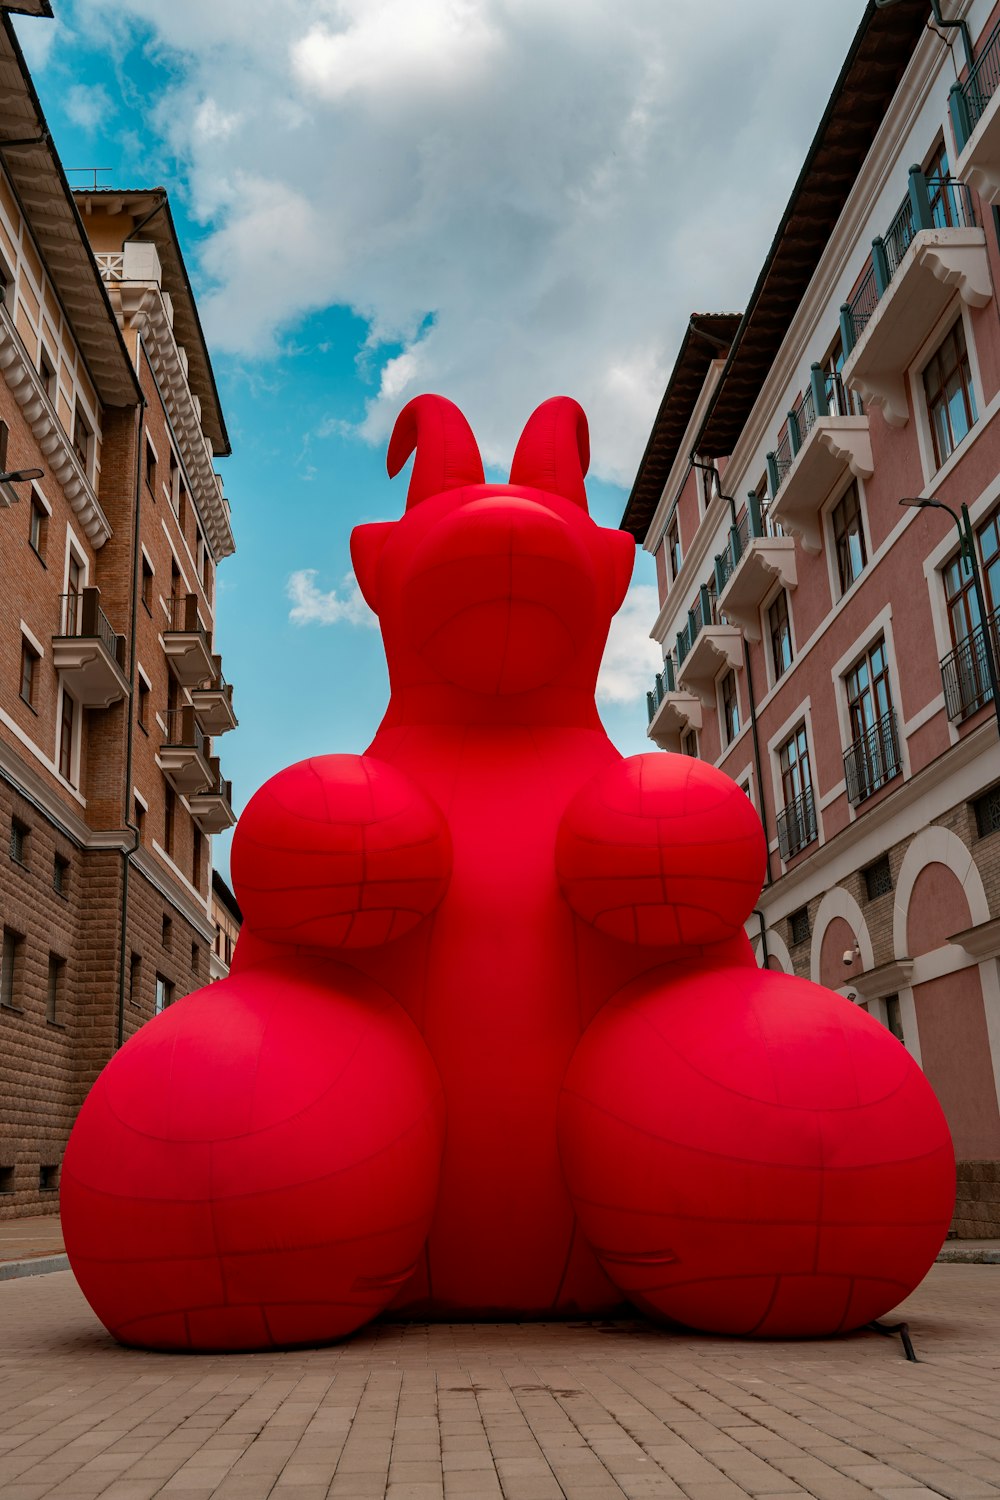 a large red sculpture sitting in the middle of a street